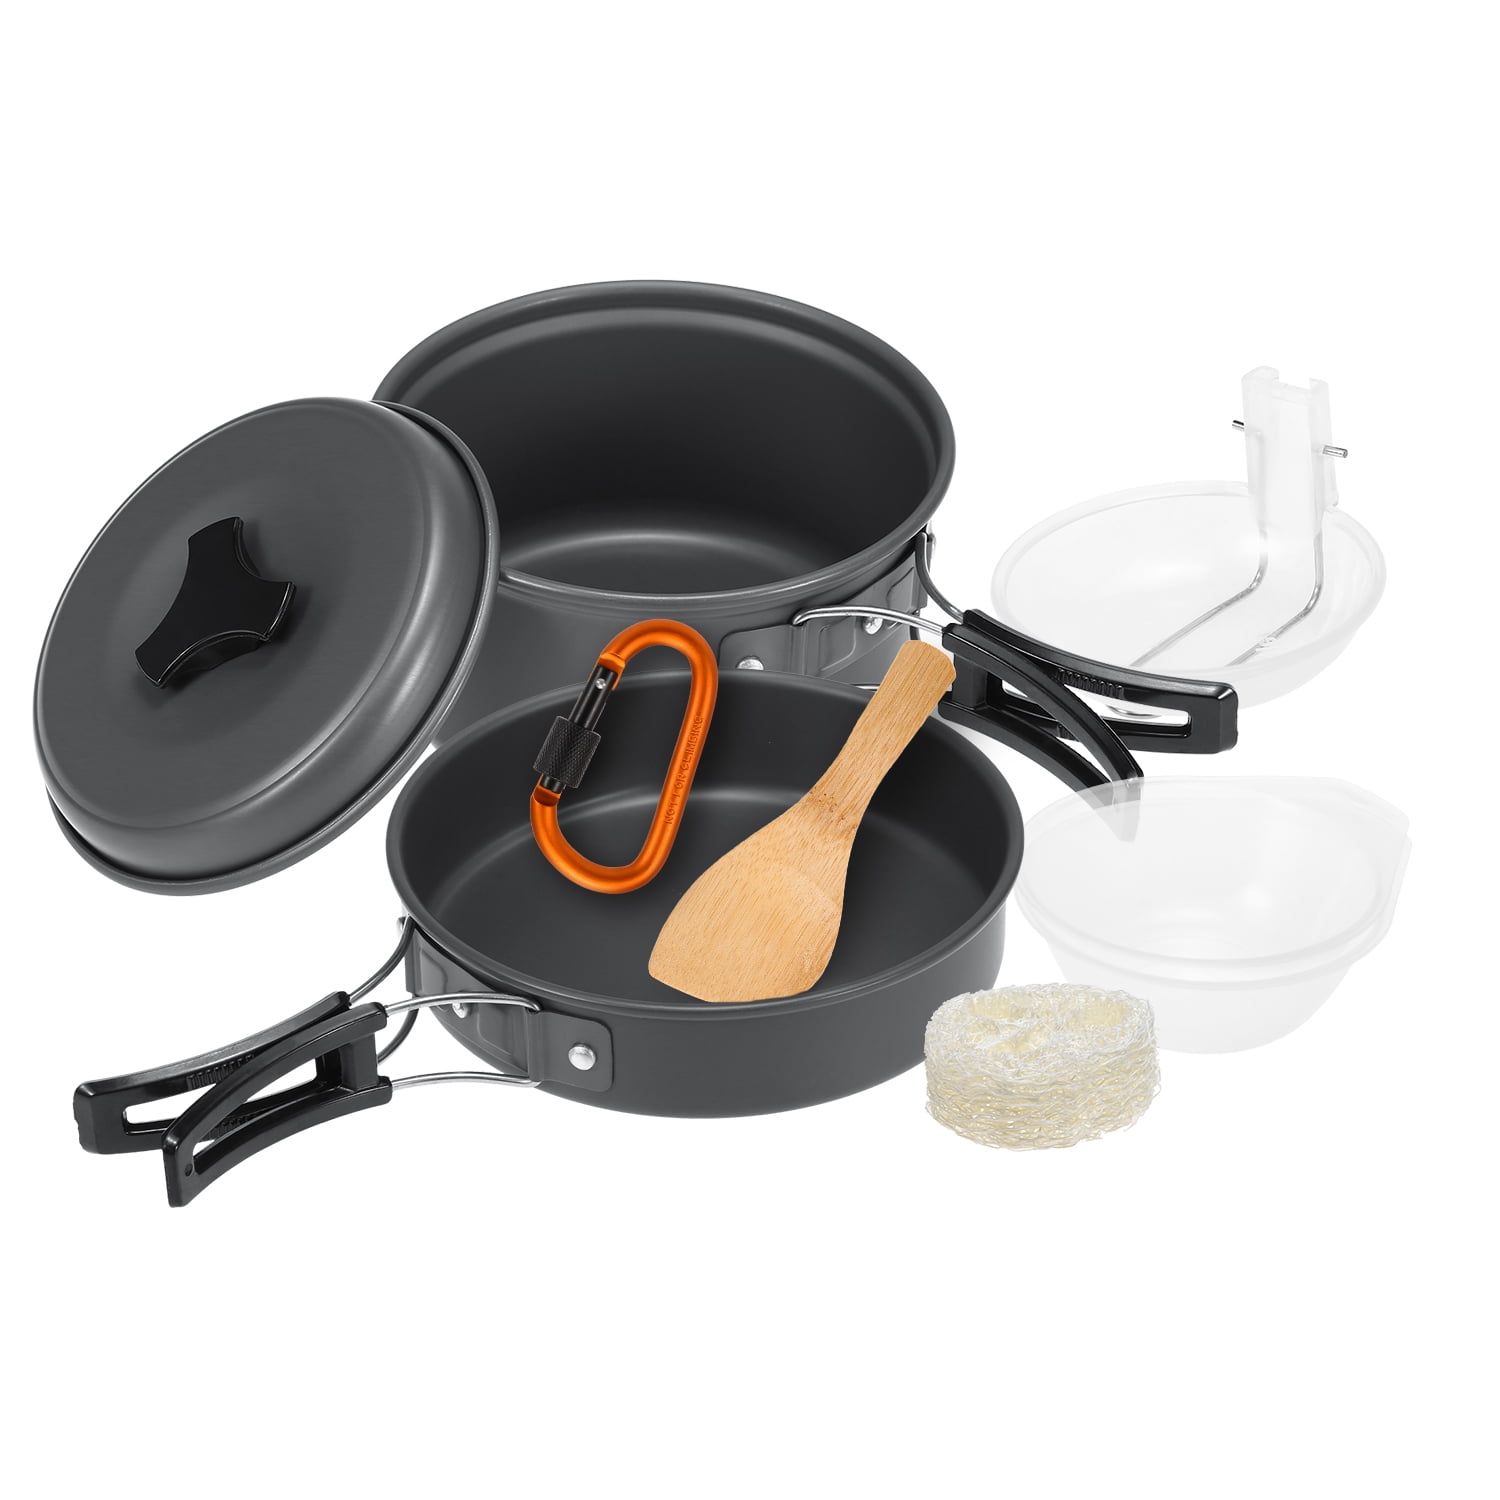 Cook Kits Portable Camping Cookware Kit Outdoor Picnic Hiking Cooking Equipment 